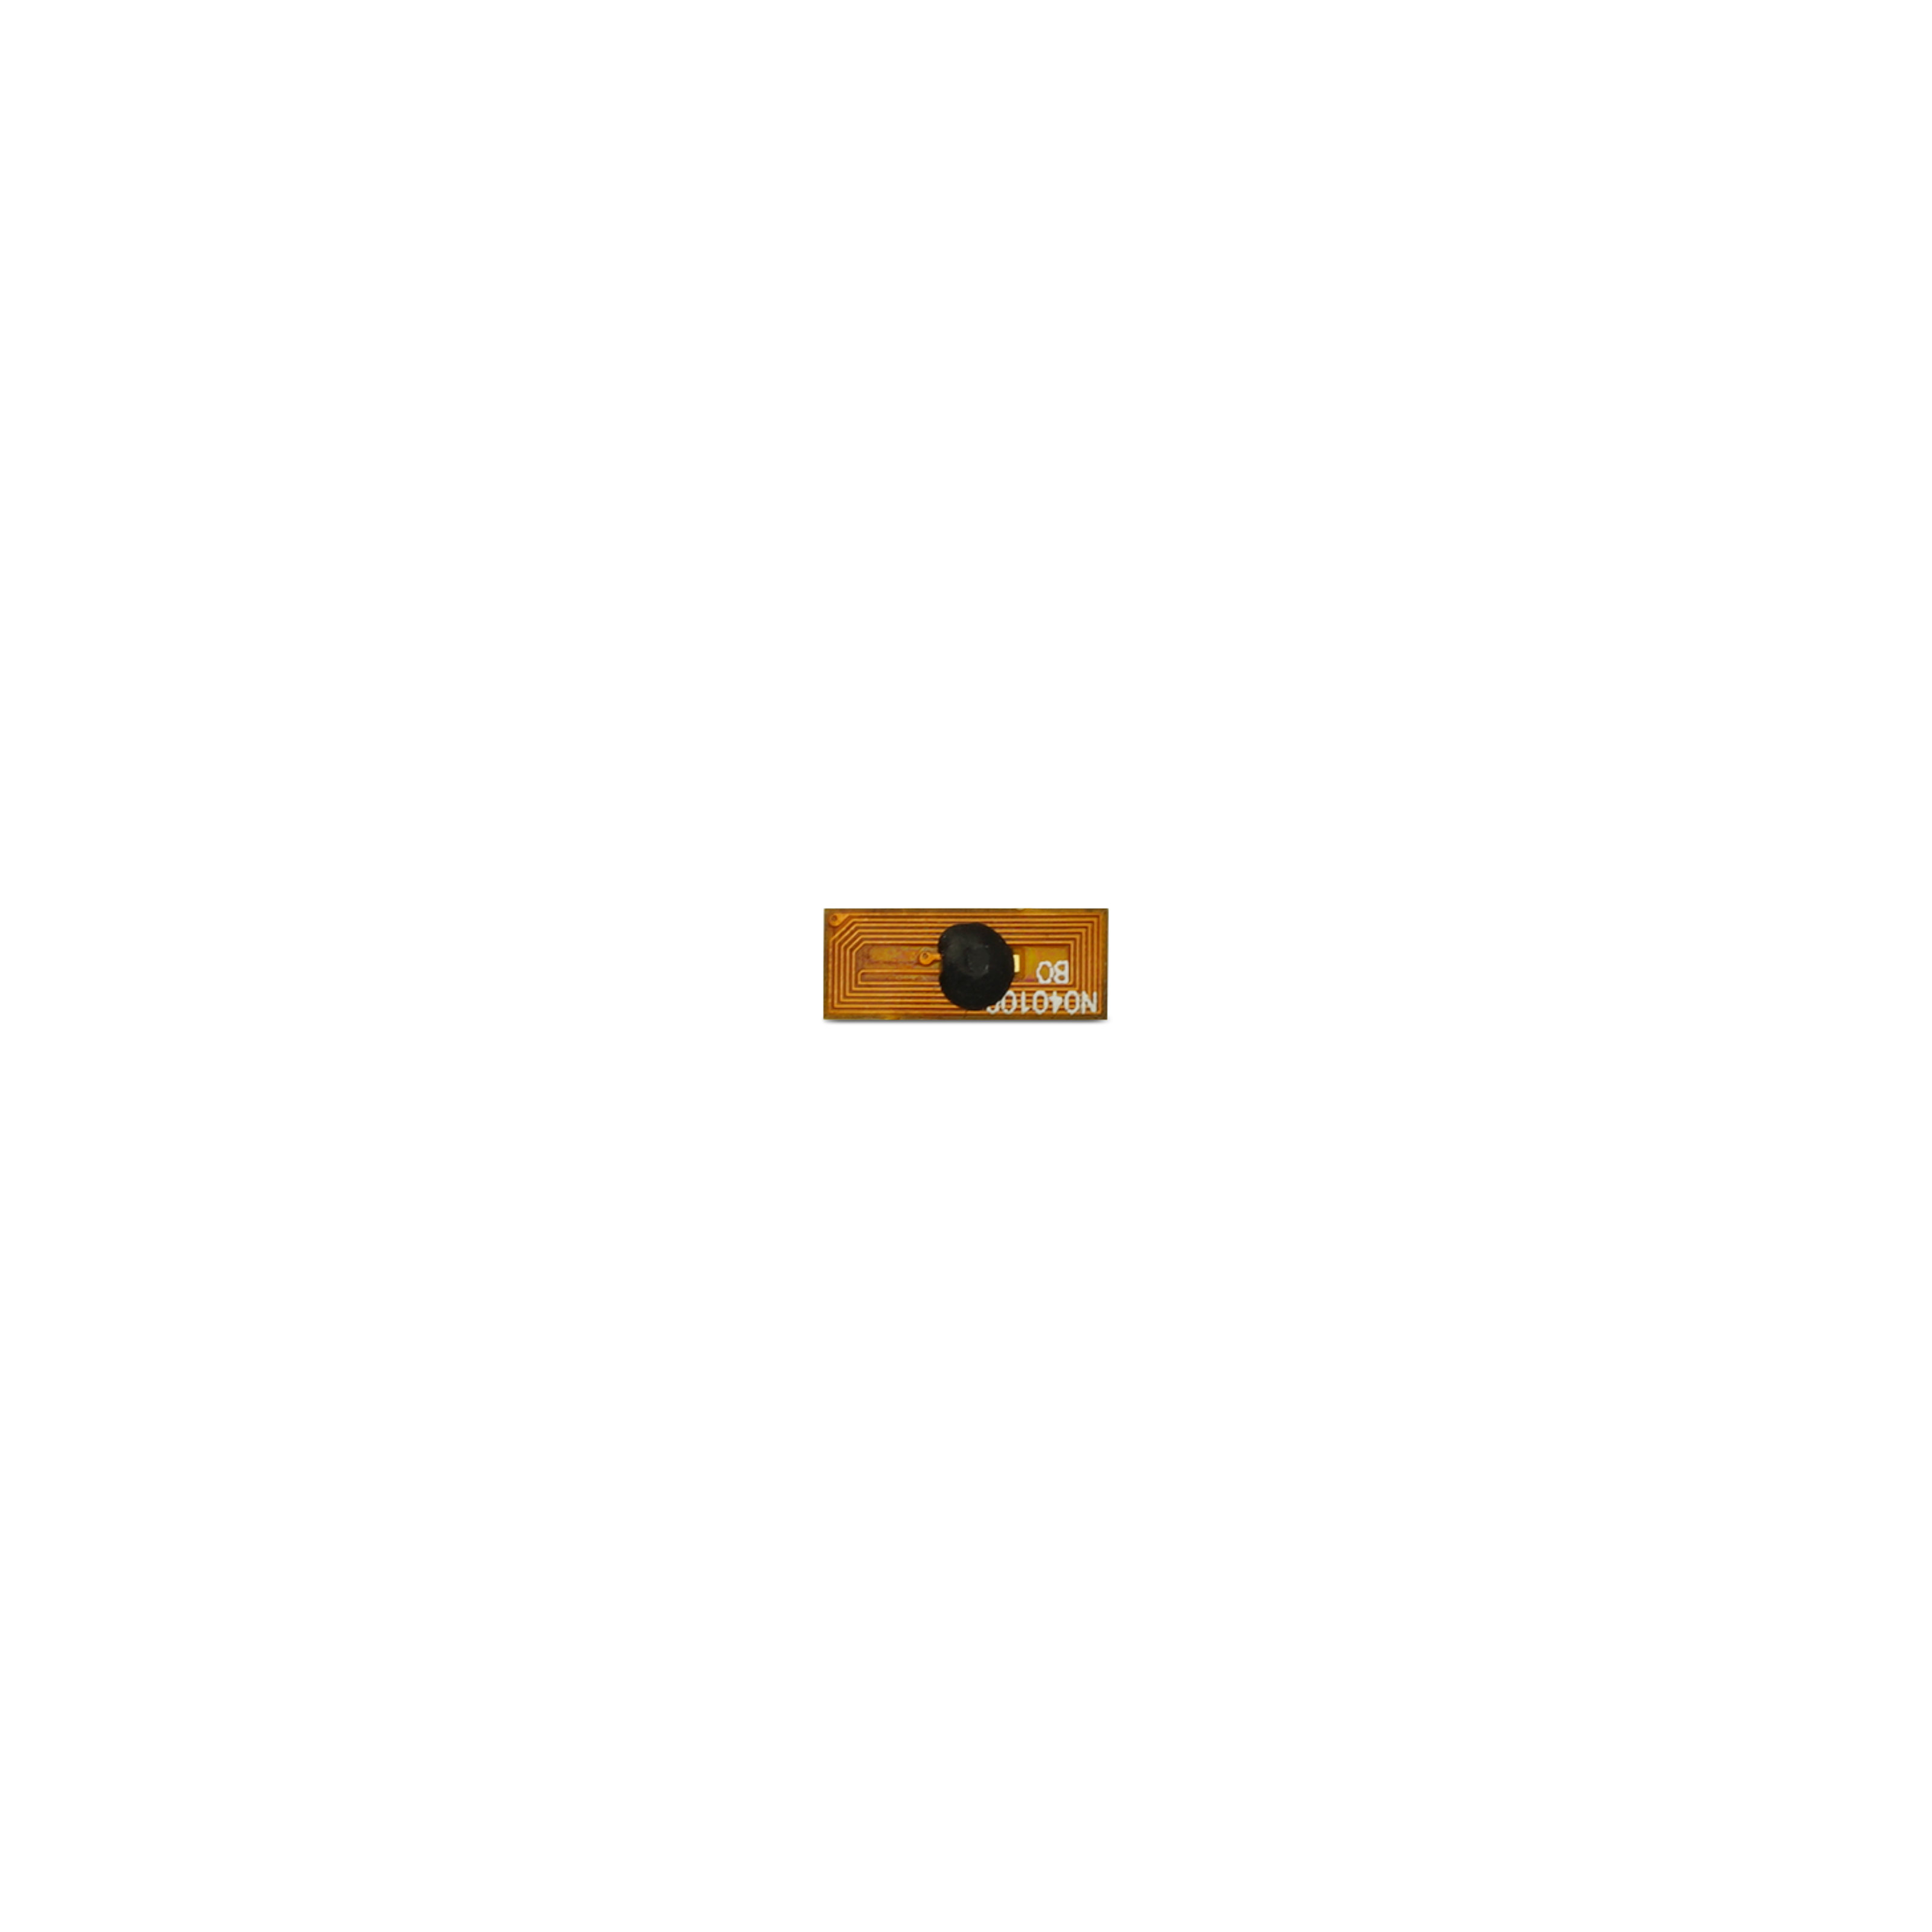 NFC Sticker FPC - On-Metal - 4 x 10 mm - NTAG213 - 180 Byte - gold